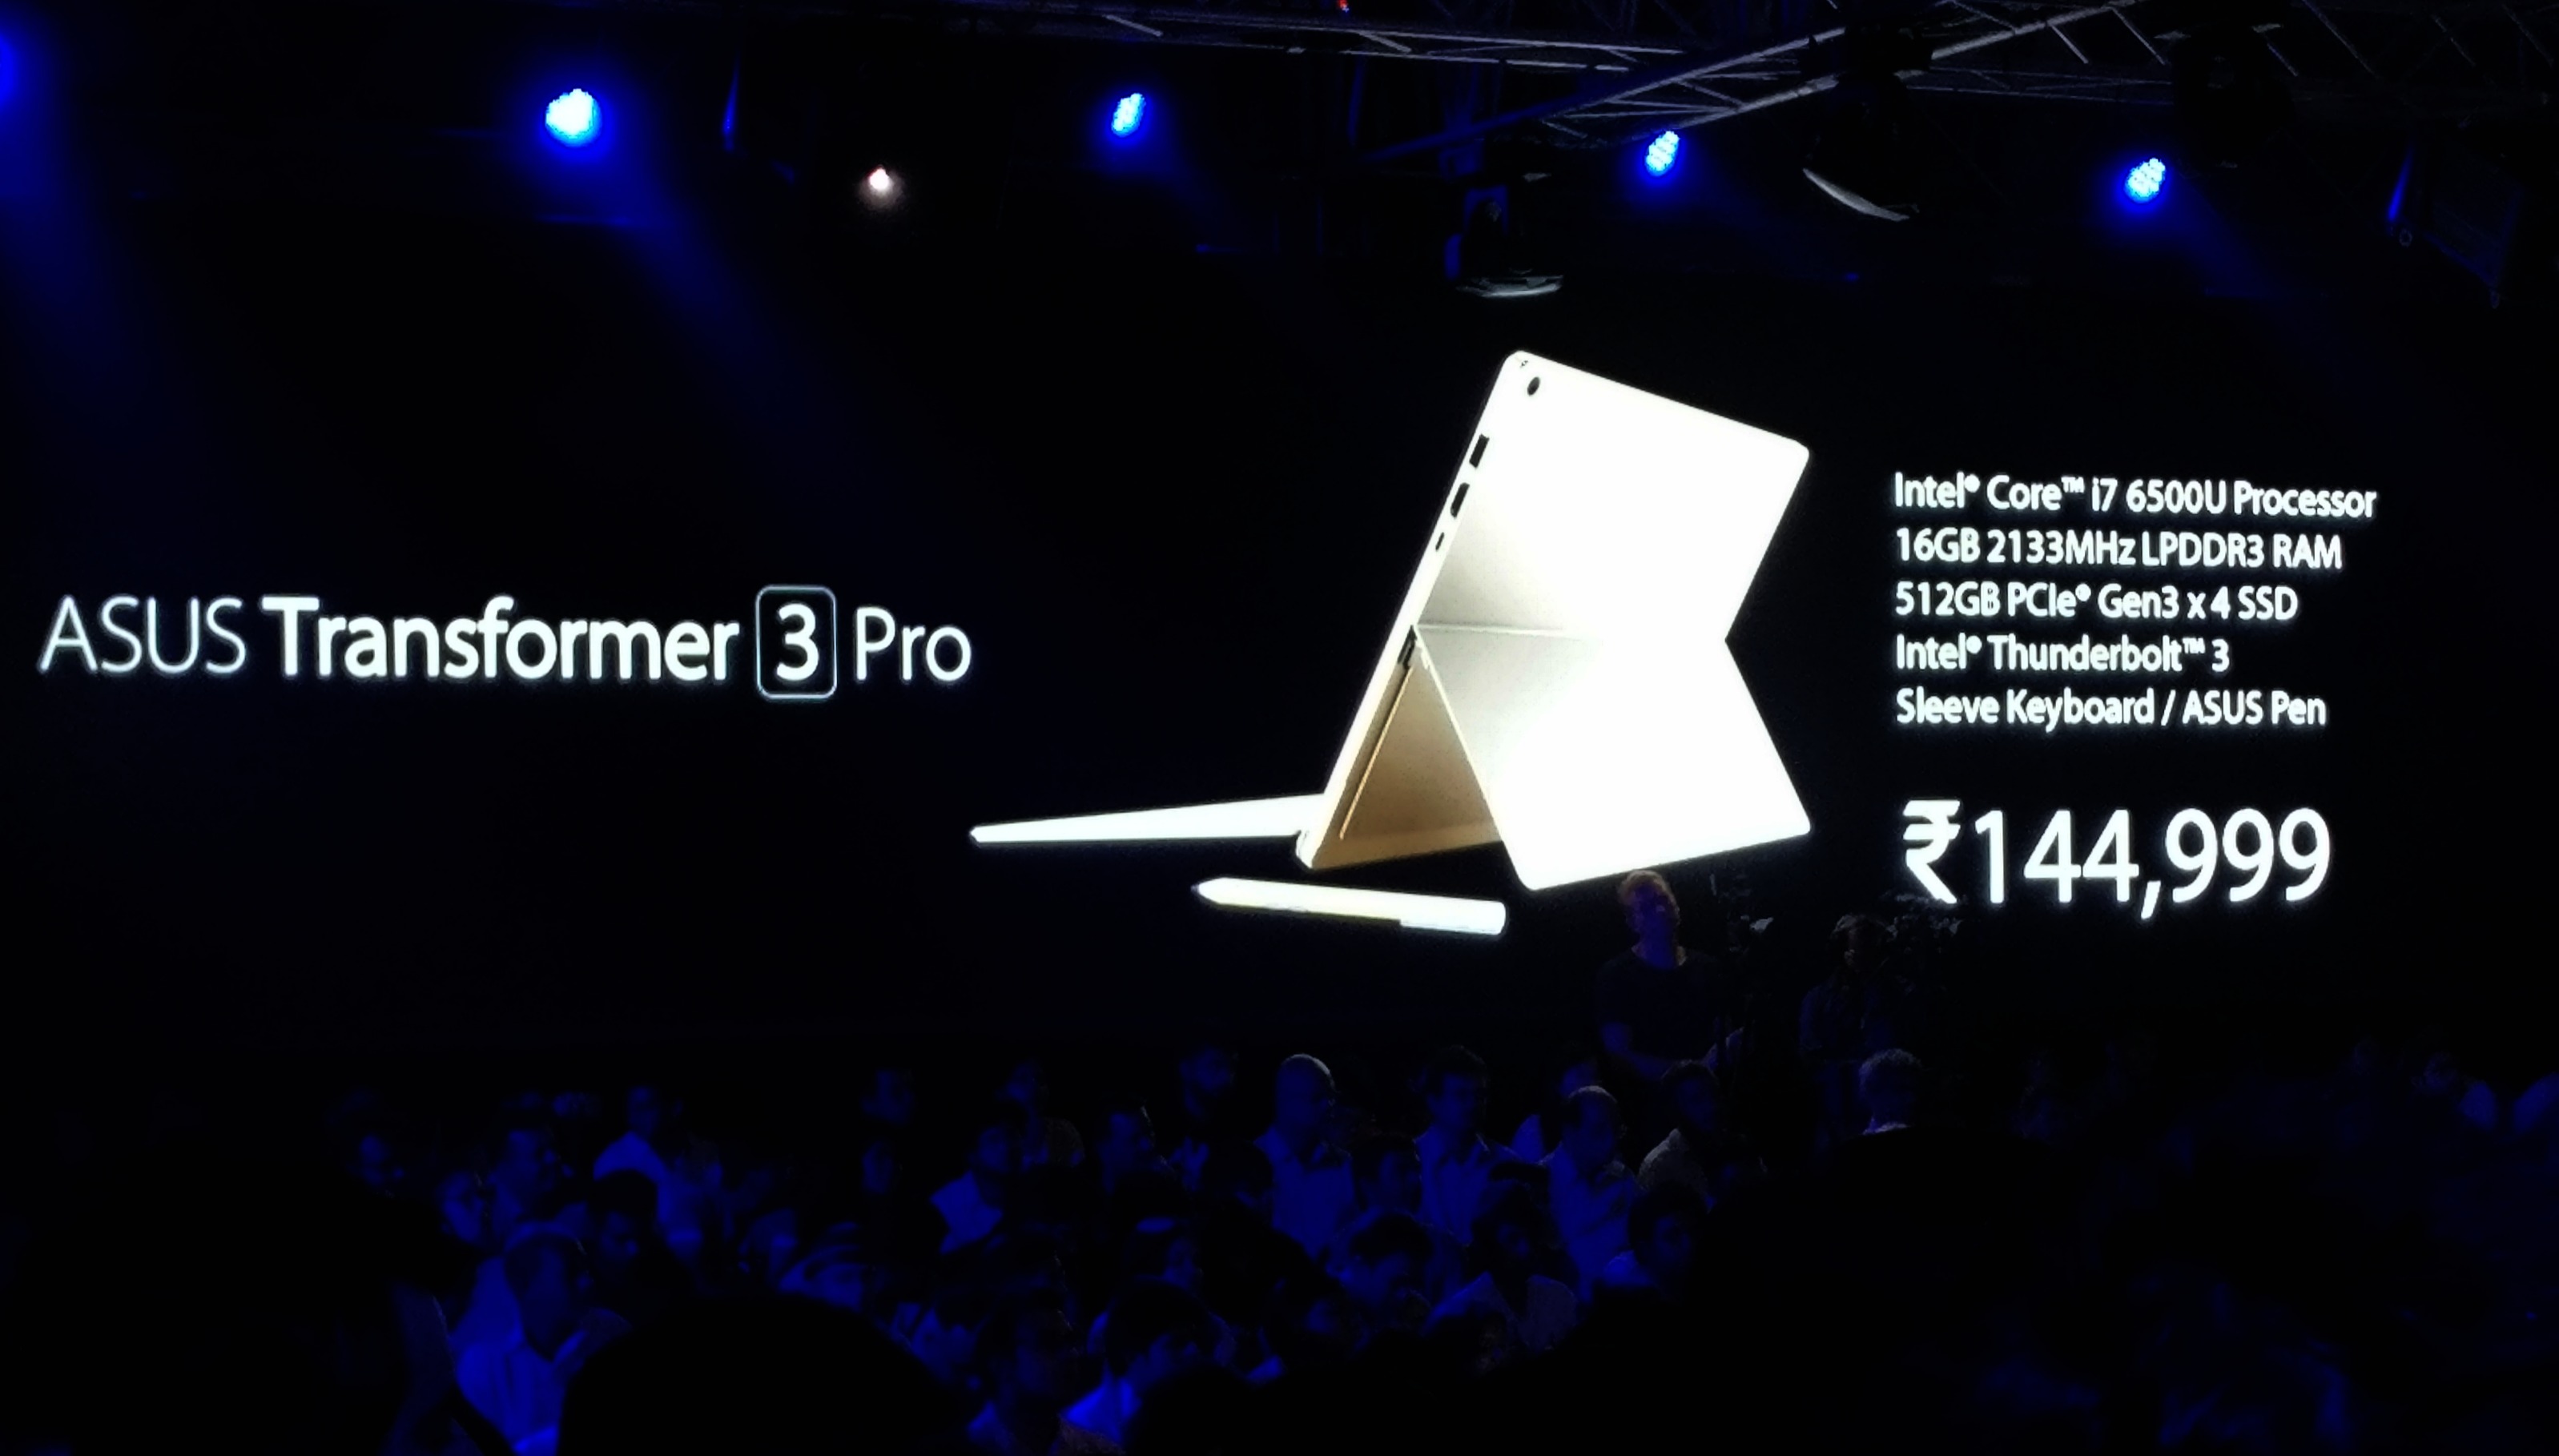 Asus Transformer 3 Pro 2-in-1 with Intel Core i7 launched ...